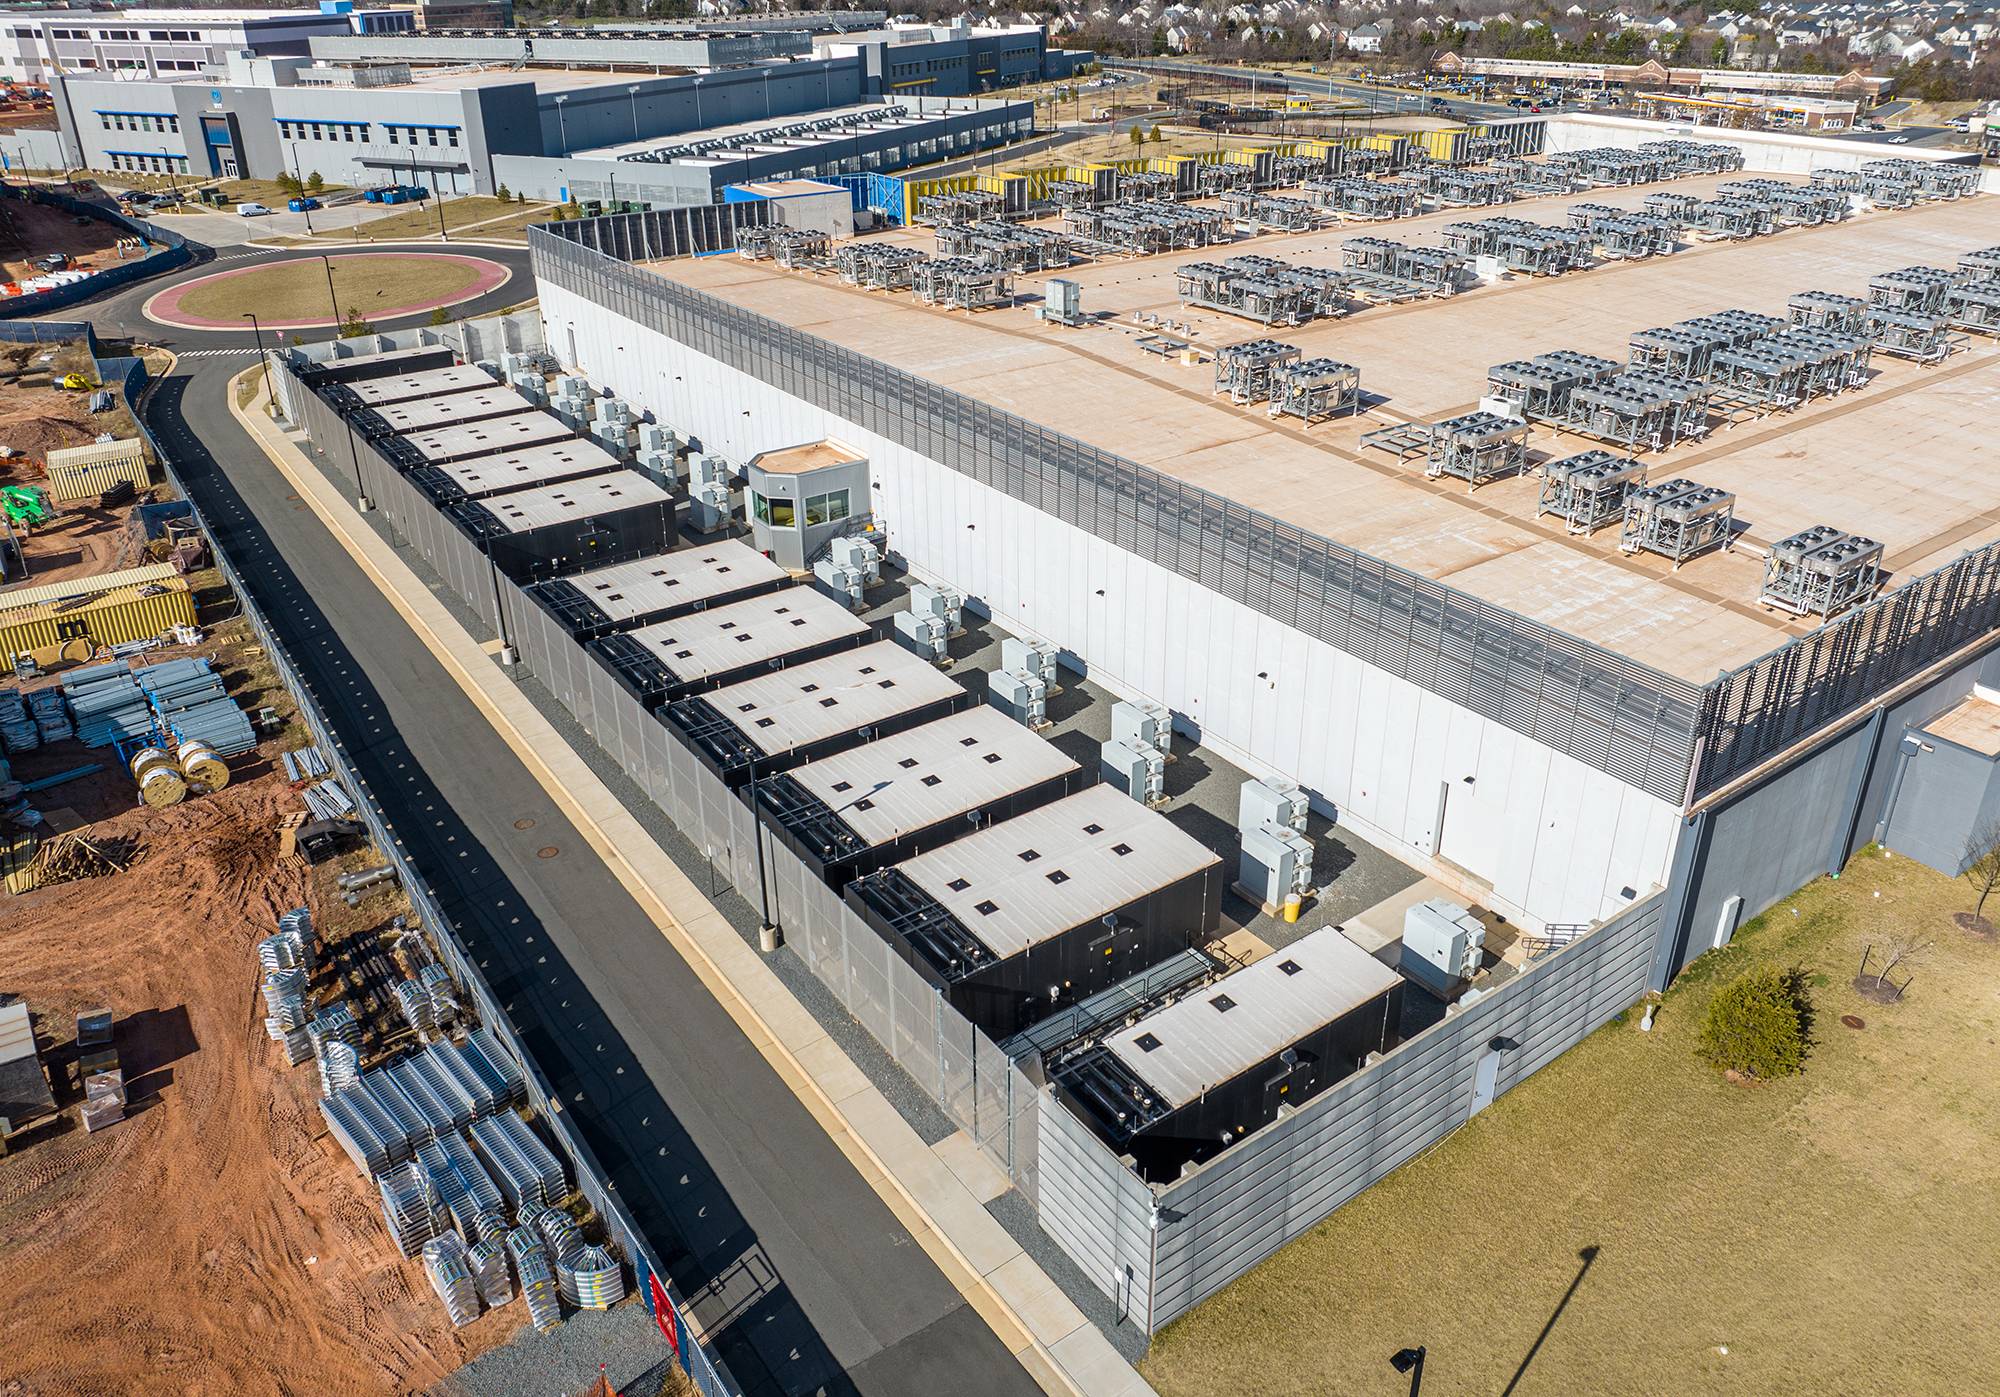 large box building with an adjacent row of 10+ rectangle diesel generators